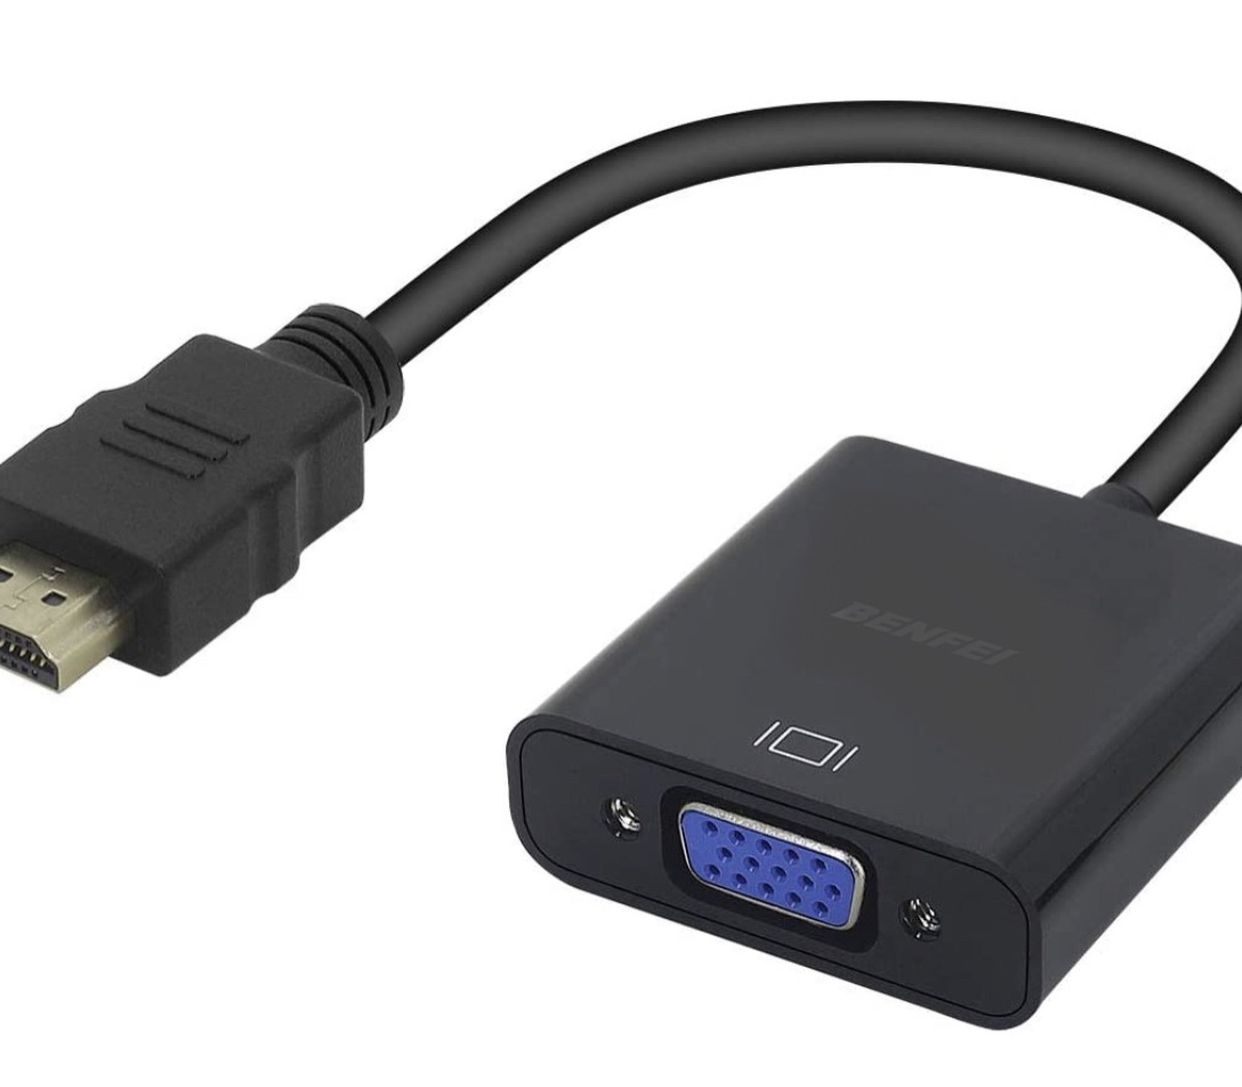 HDMI to VGA Adapter (Male to Female) Compatible with Computer, Desktop, Laptop, PC, Monitor, Projector, HDTV, Chromebook, Raspberry Pi, Roku, Xbox and